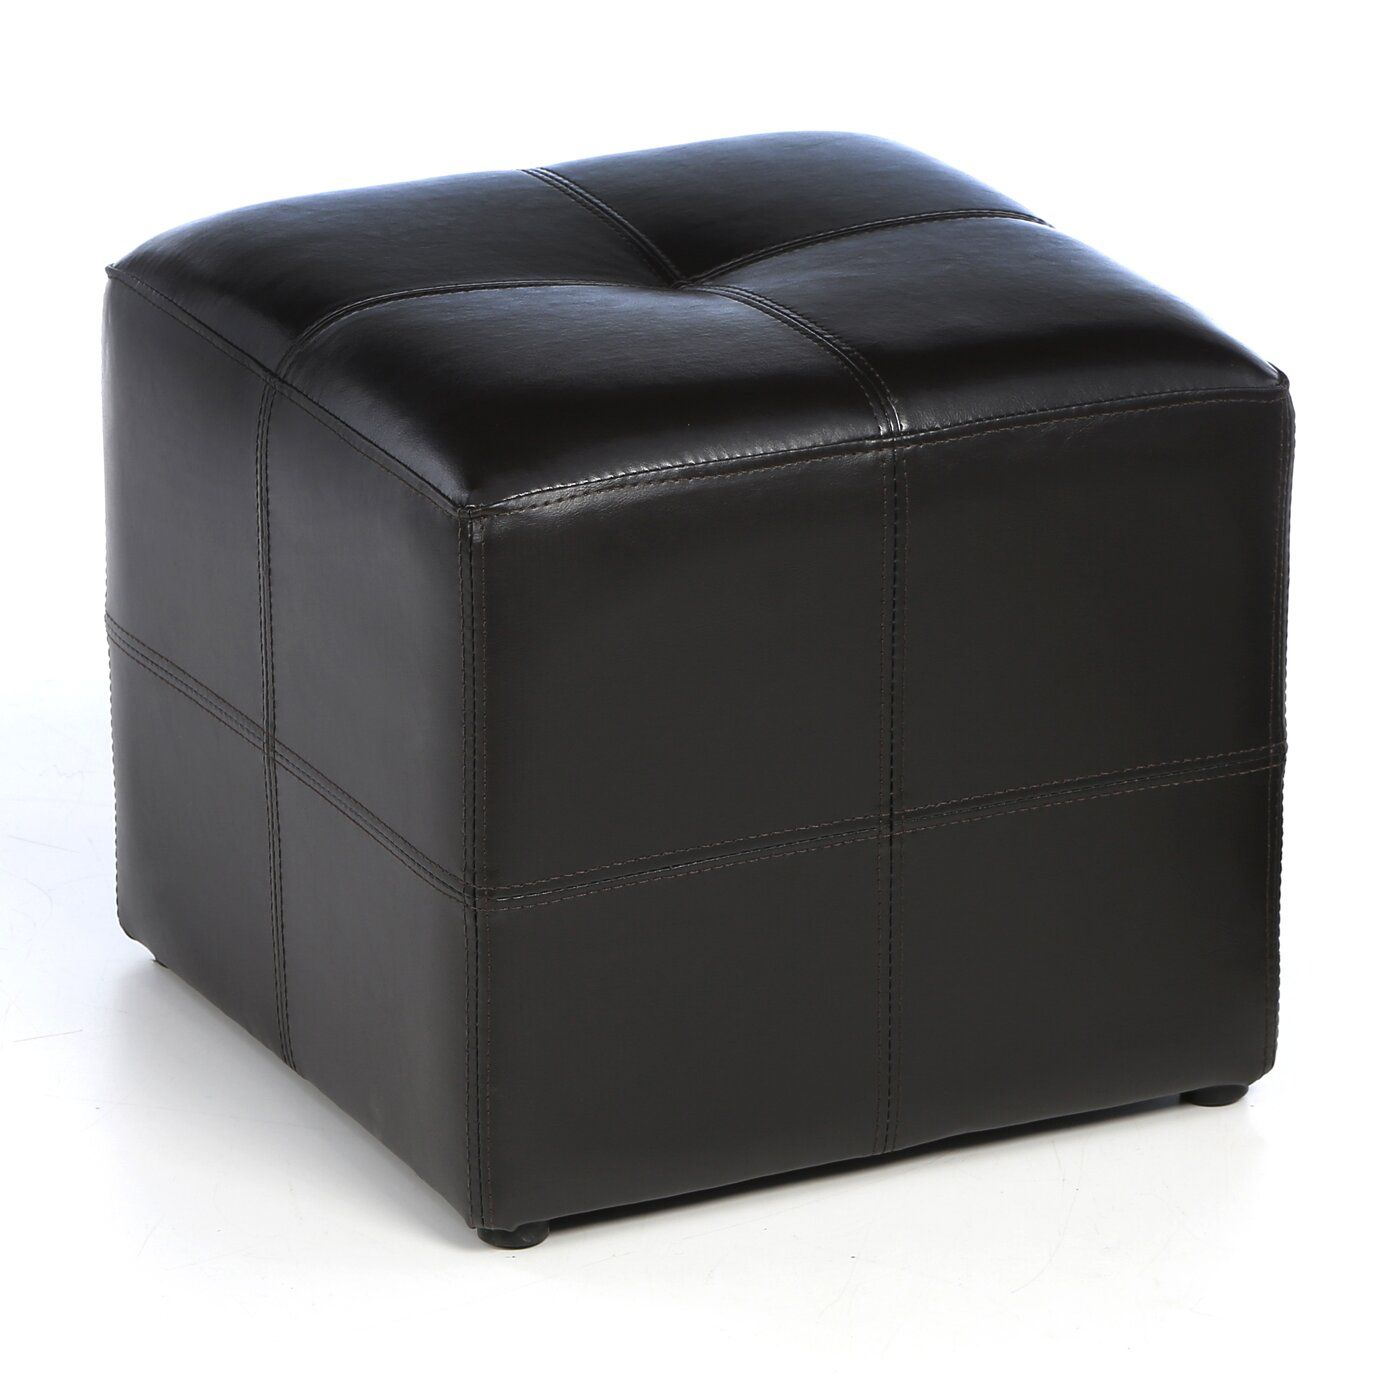 Andover Mills Starwood Cube Ottoman & Reviews | Wayfair Within Twill Square Cube Ottomans (View 3 of 20)